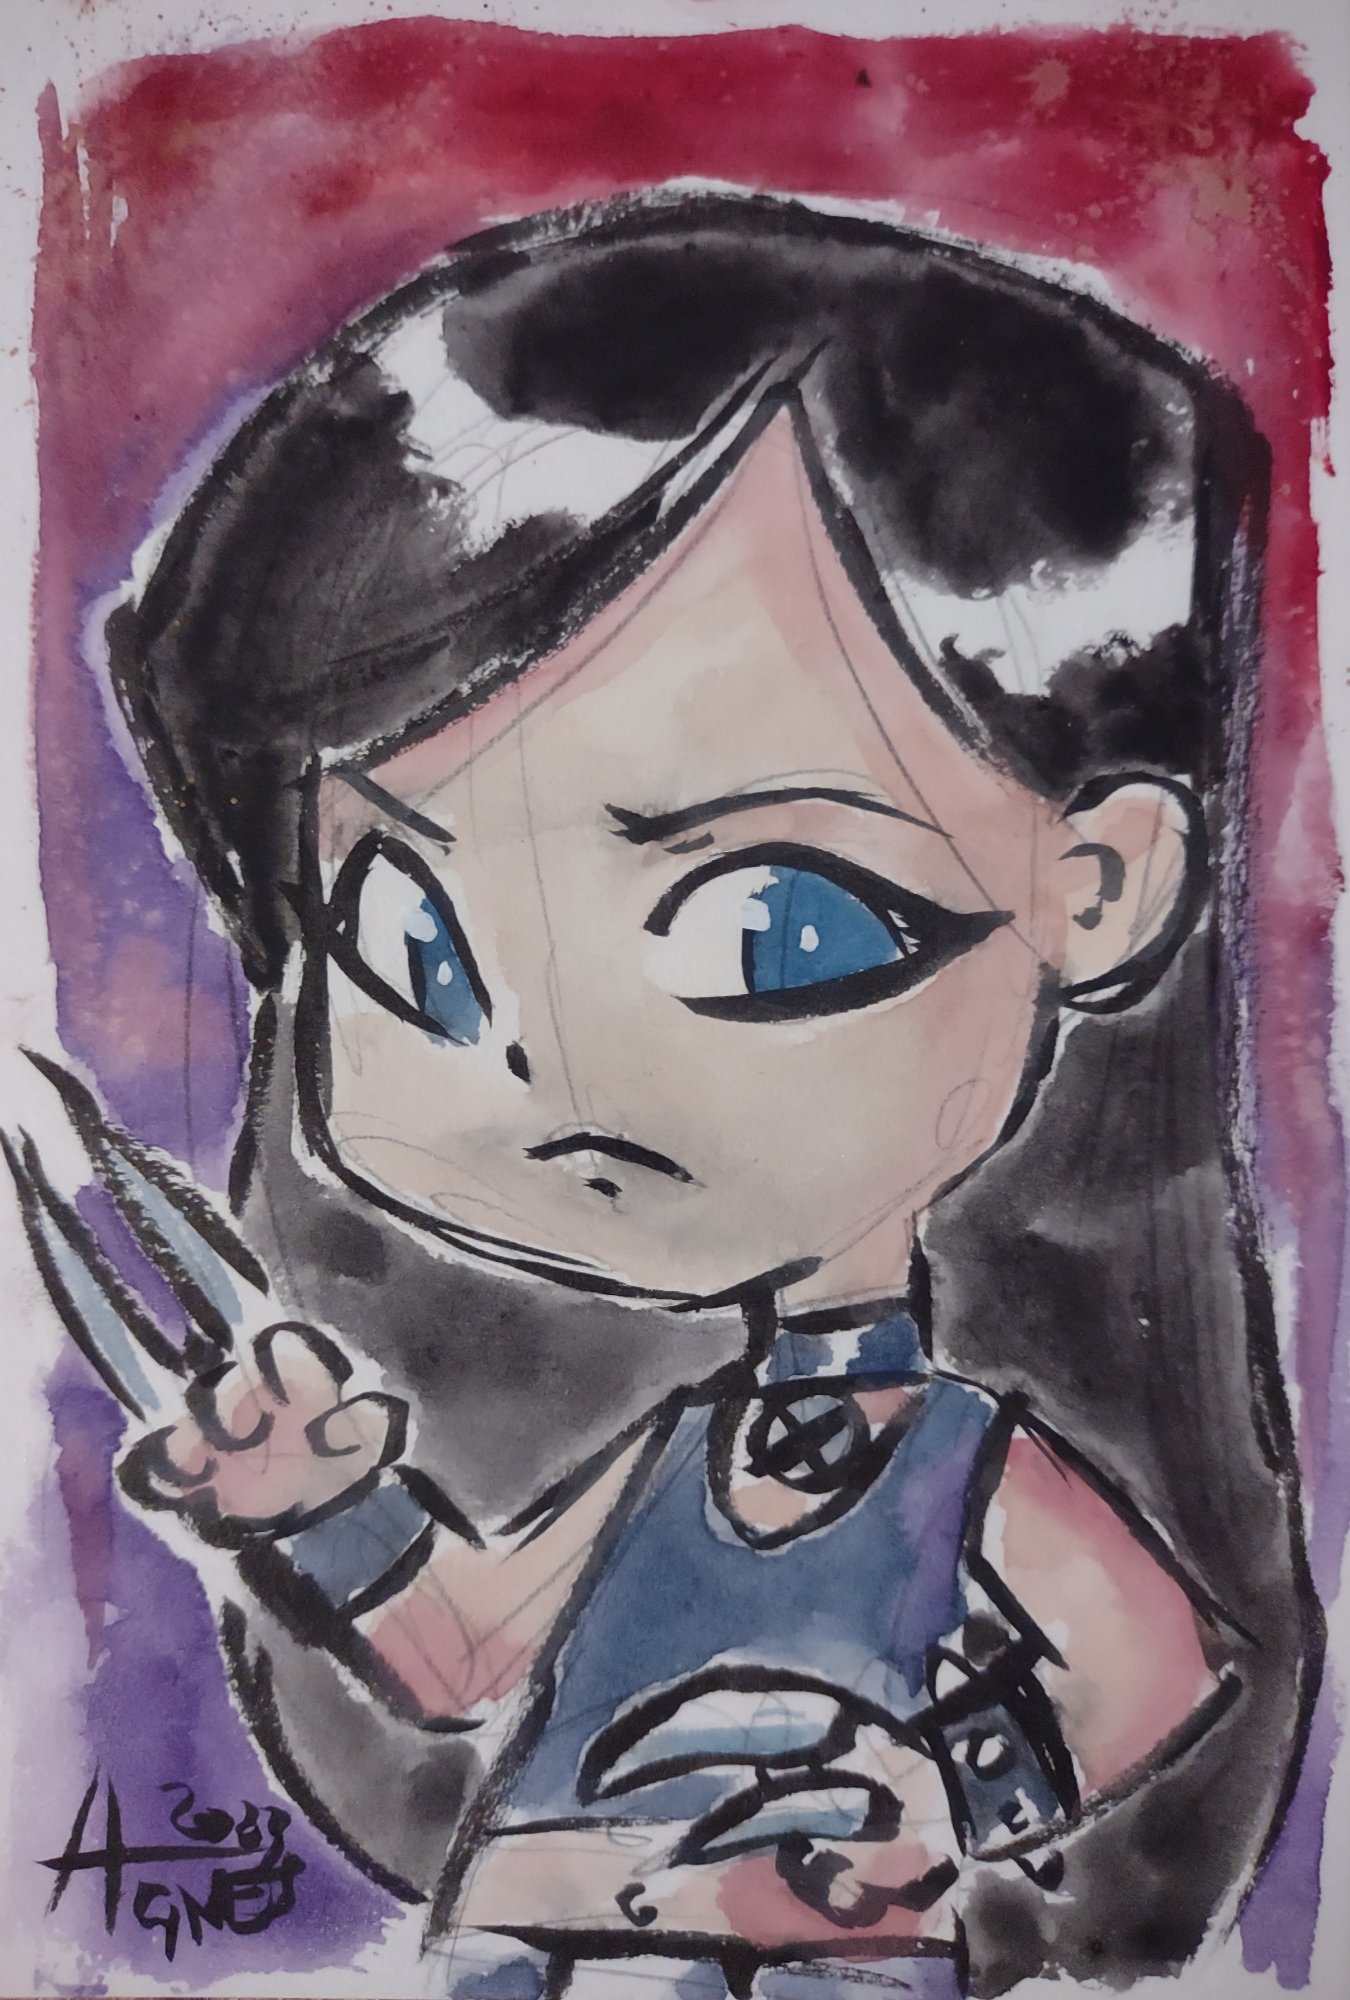 X 23 Commission In Misty And Kristy Pucketts X 23 Commissions Comic Art Gallery Room